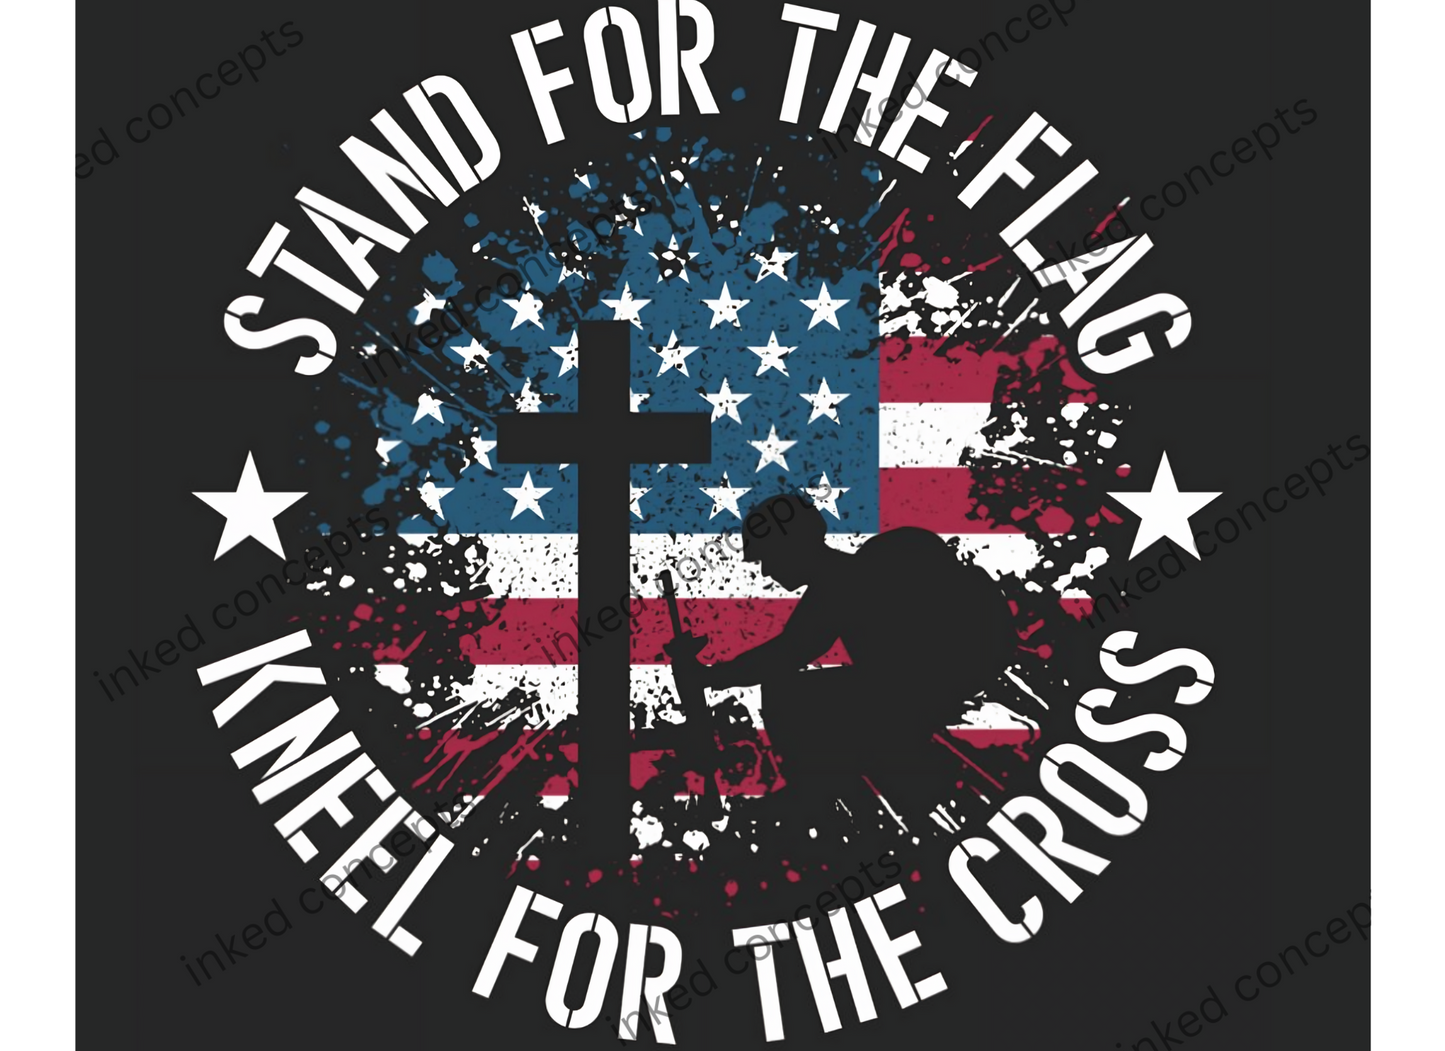 Patriotic Stand For The Flag, Kneel for The Cross